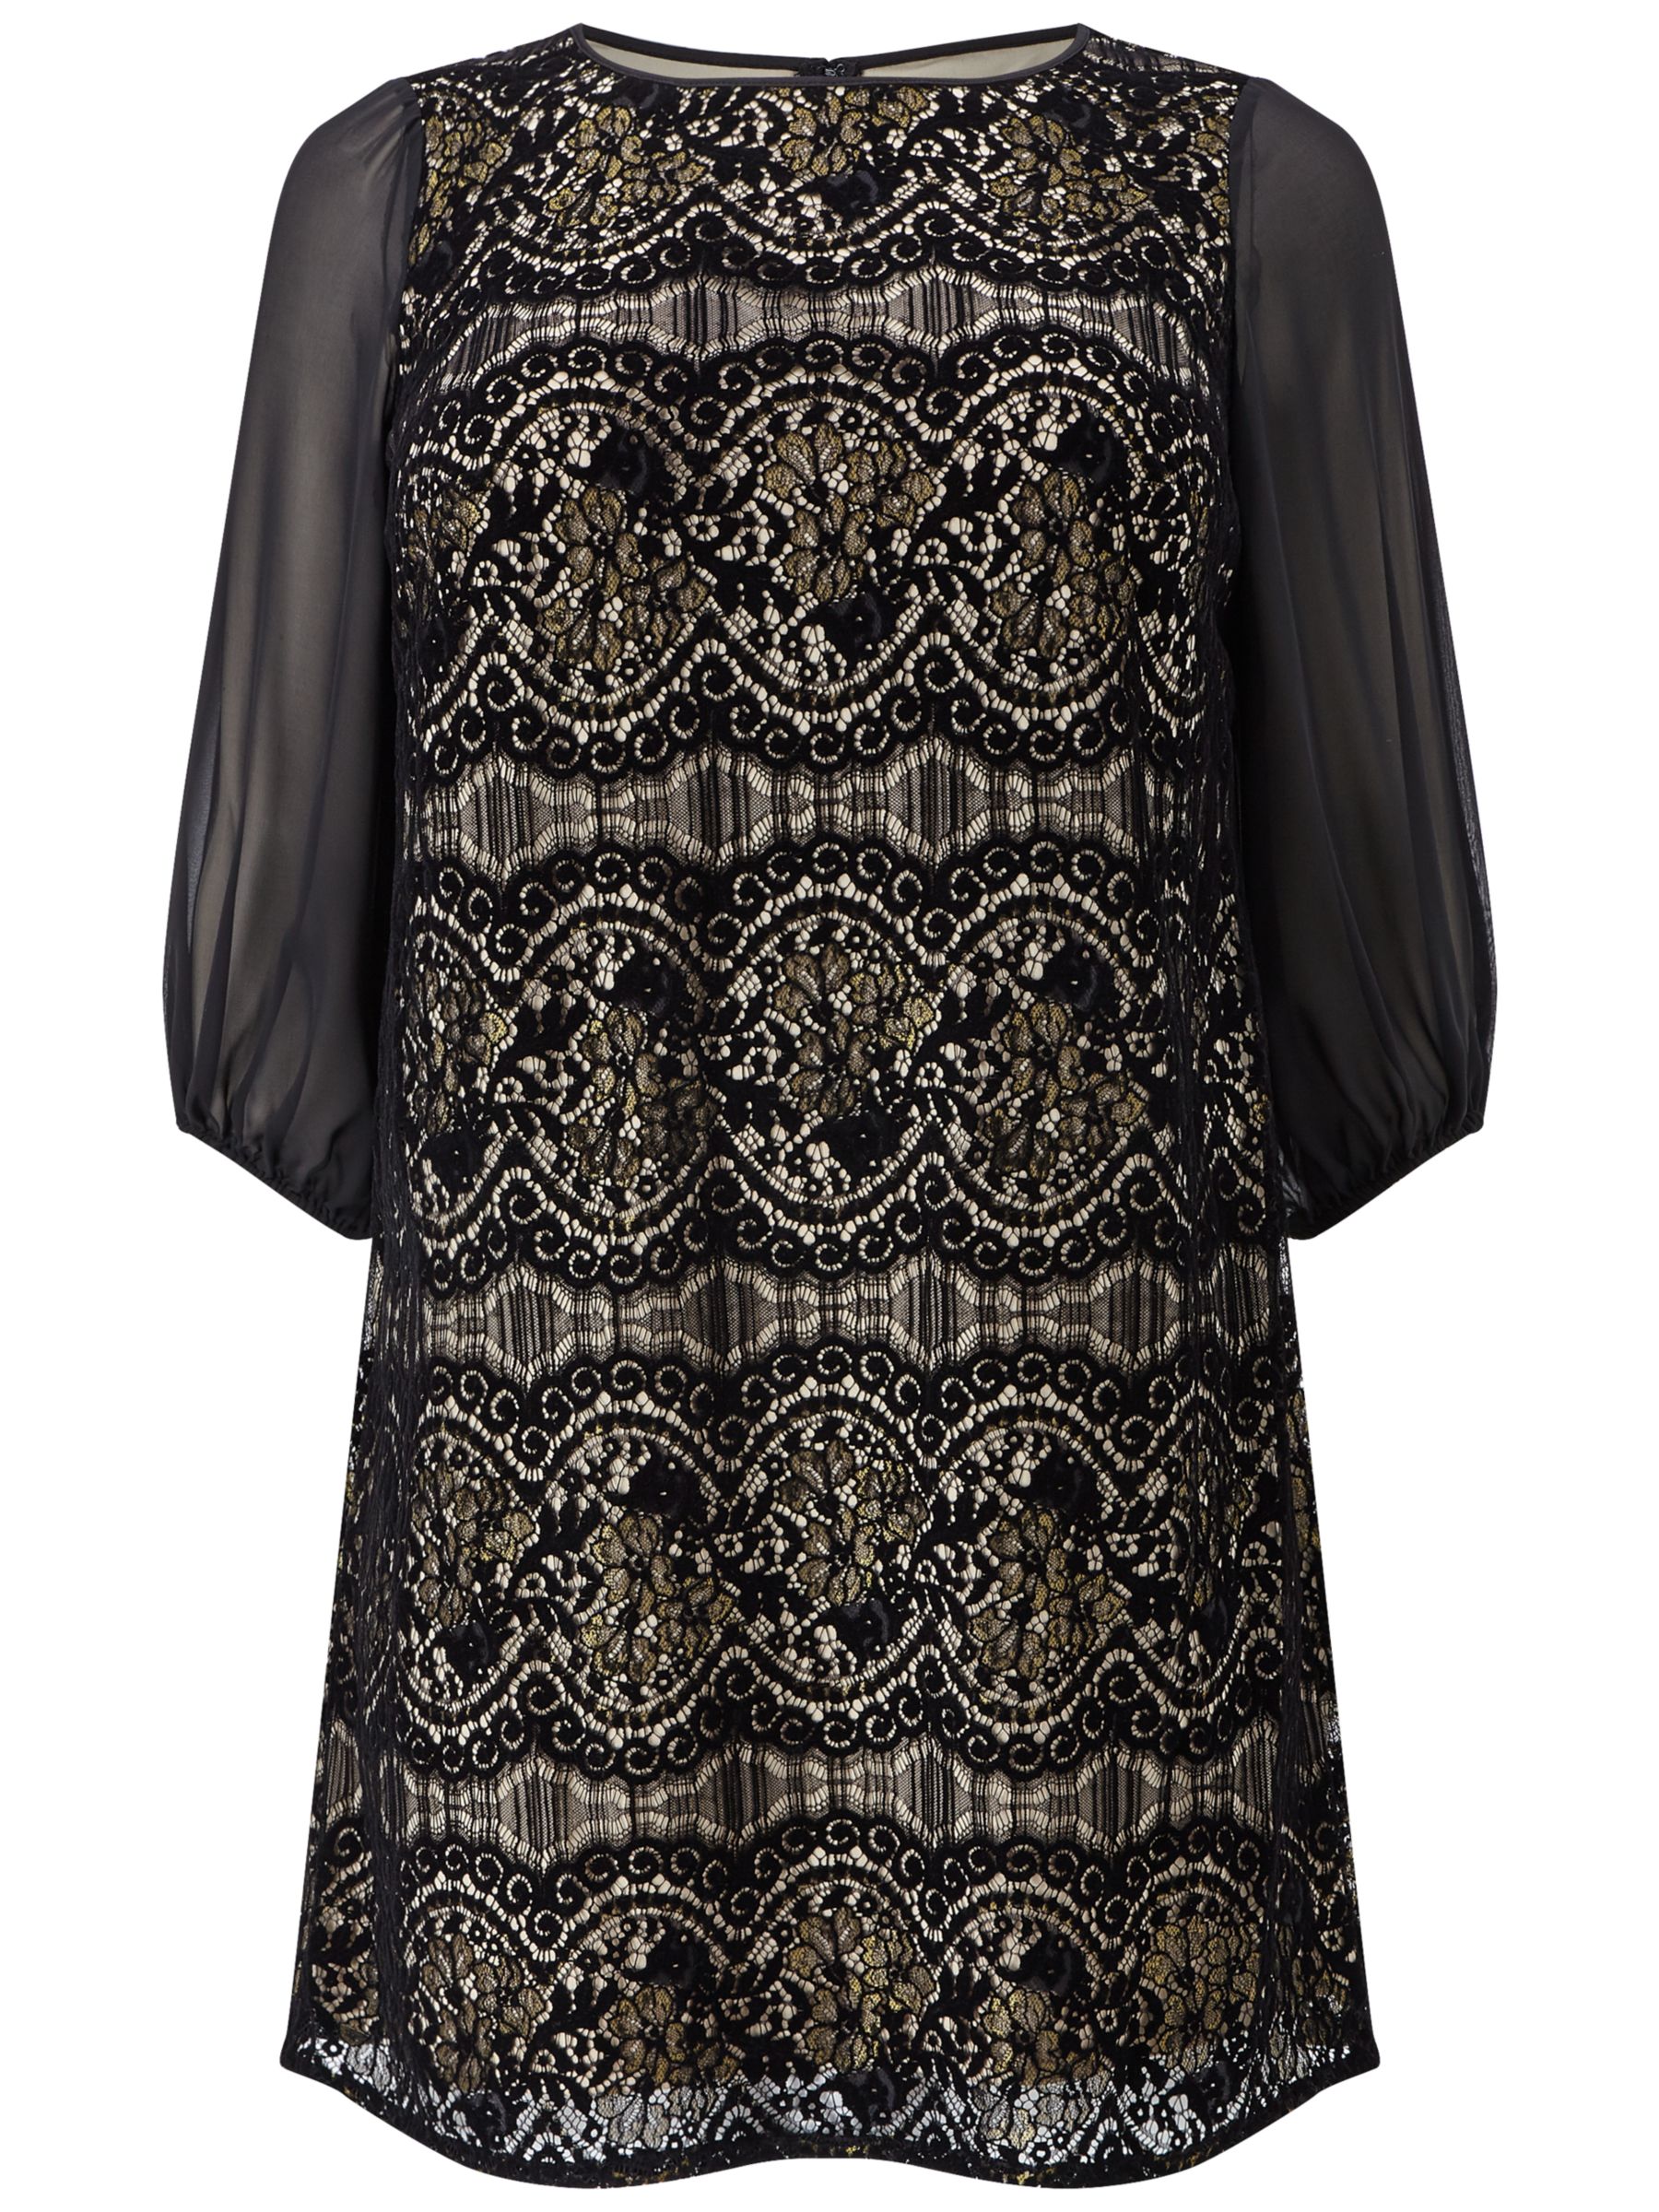 Adrianna Papell Plus Size Scalloped Lace Shift Dress, Black/Champagne